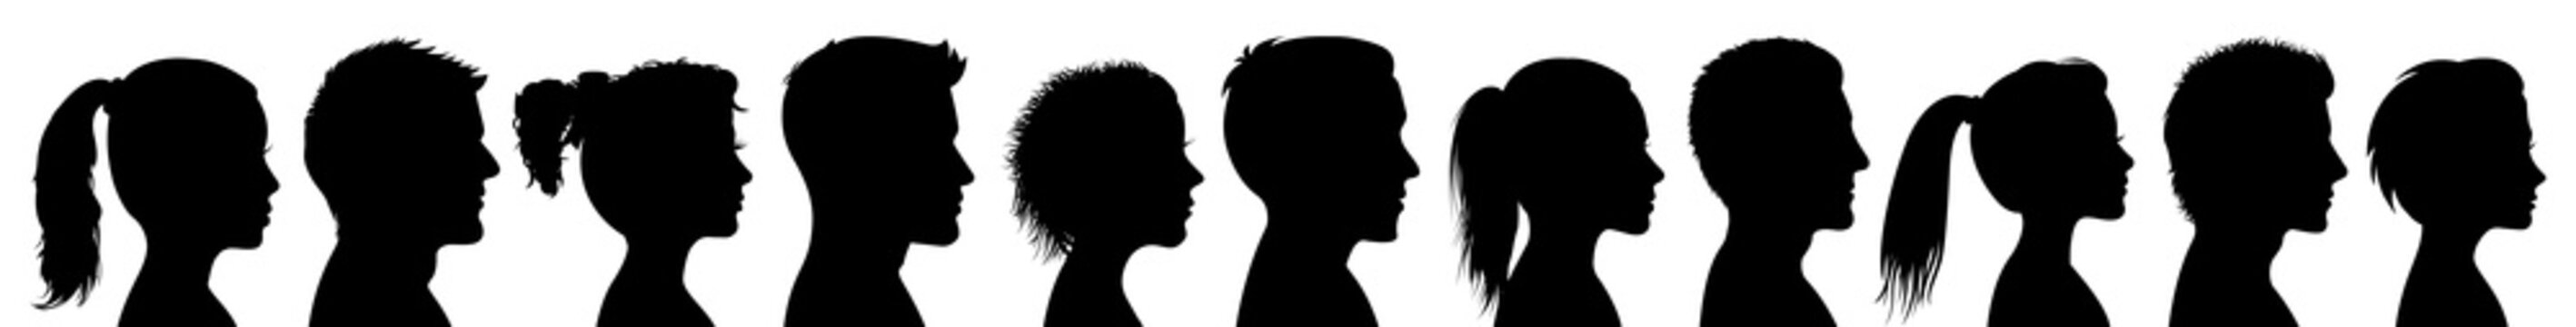 Group young people. Profile silhouette faces boys and girls set, man and woman – stock vector